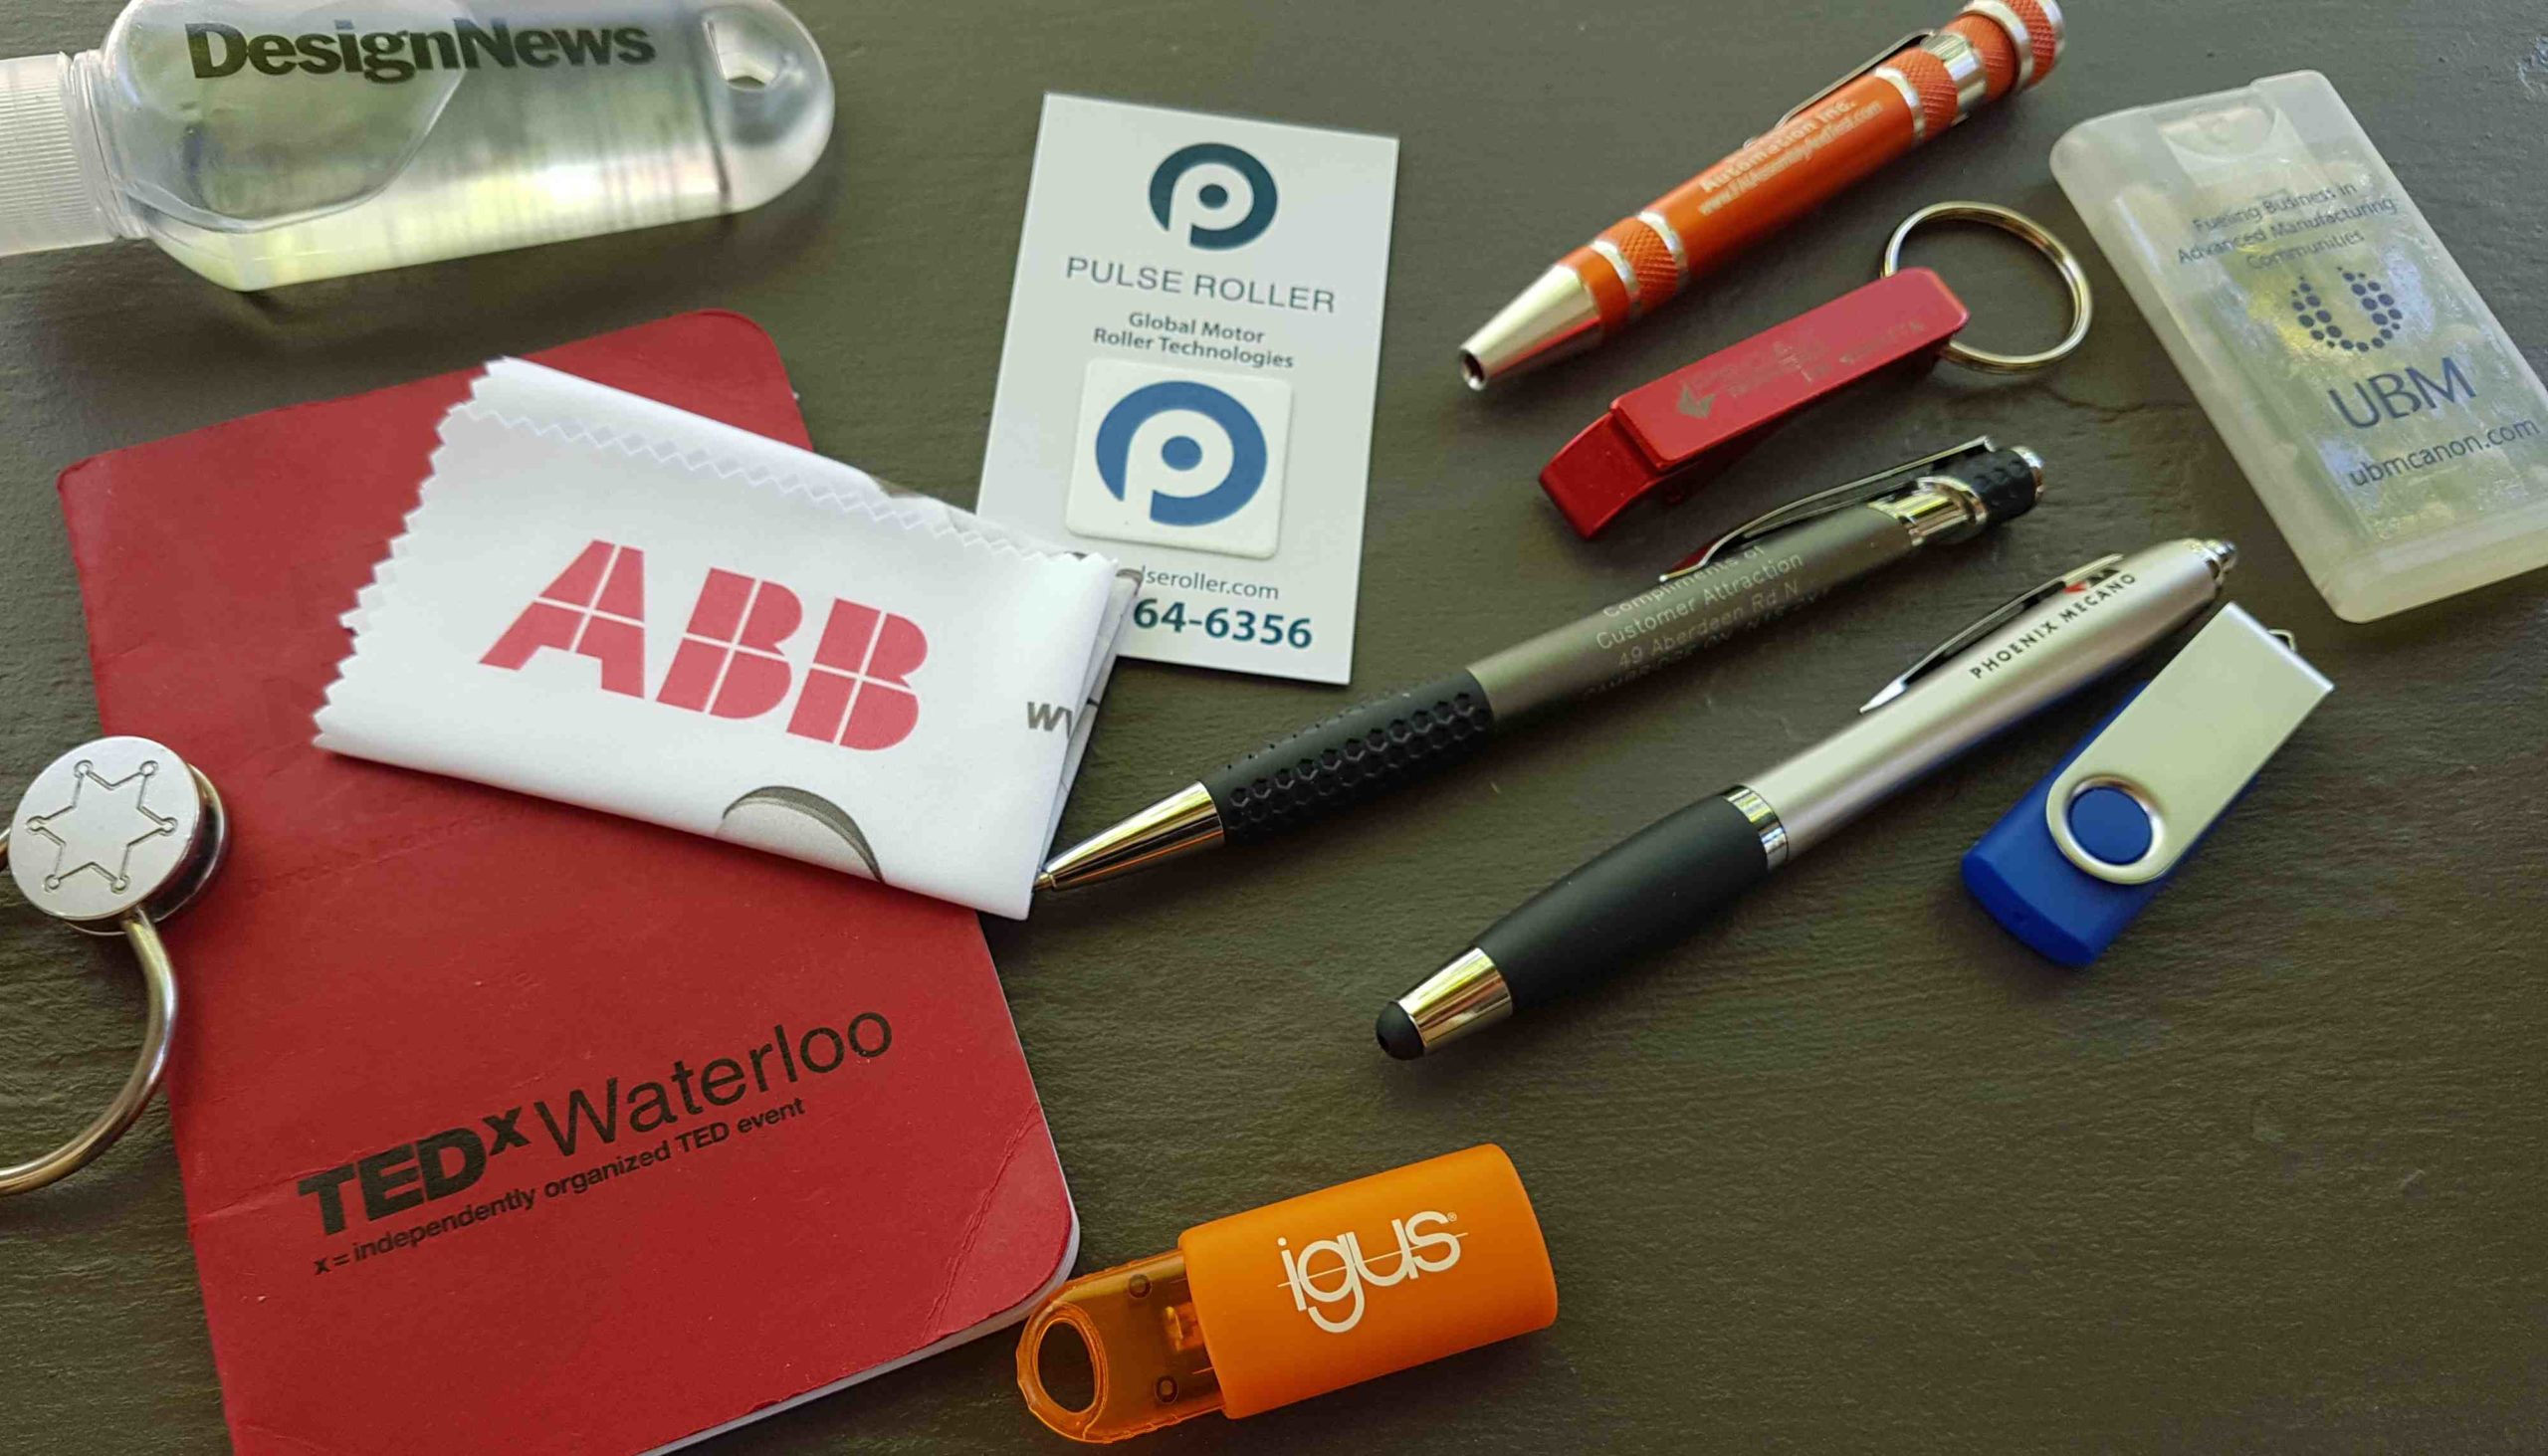 The Best SWAG Premiums and Trade Show Giveaways